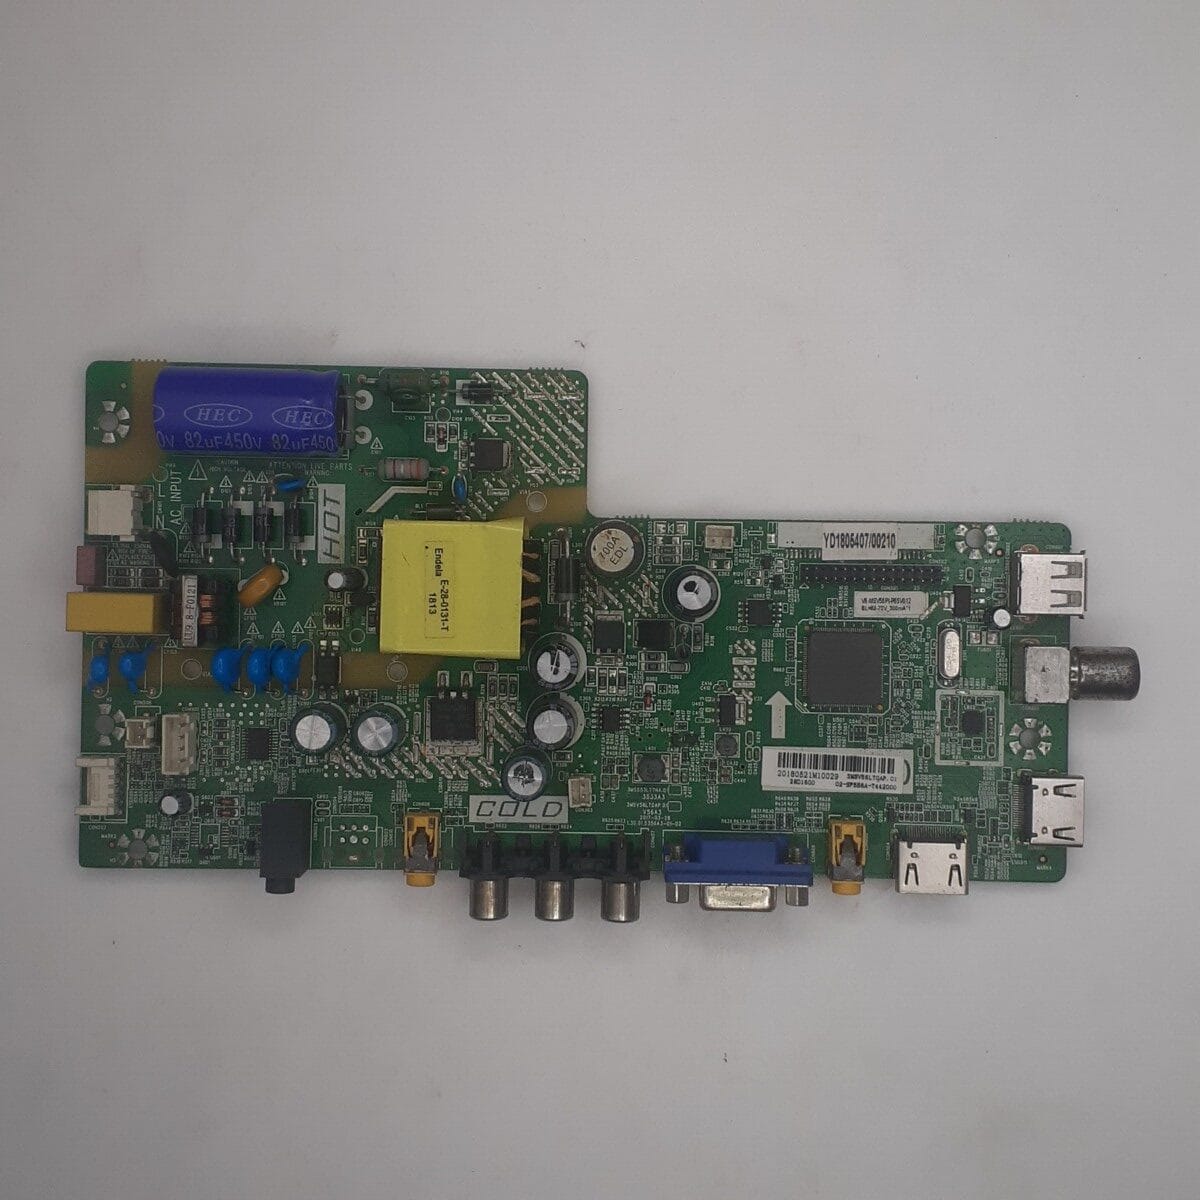 22A8100 MICROMAX MOTHERBOARD FOR LED TV 2nos